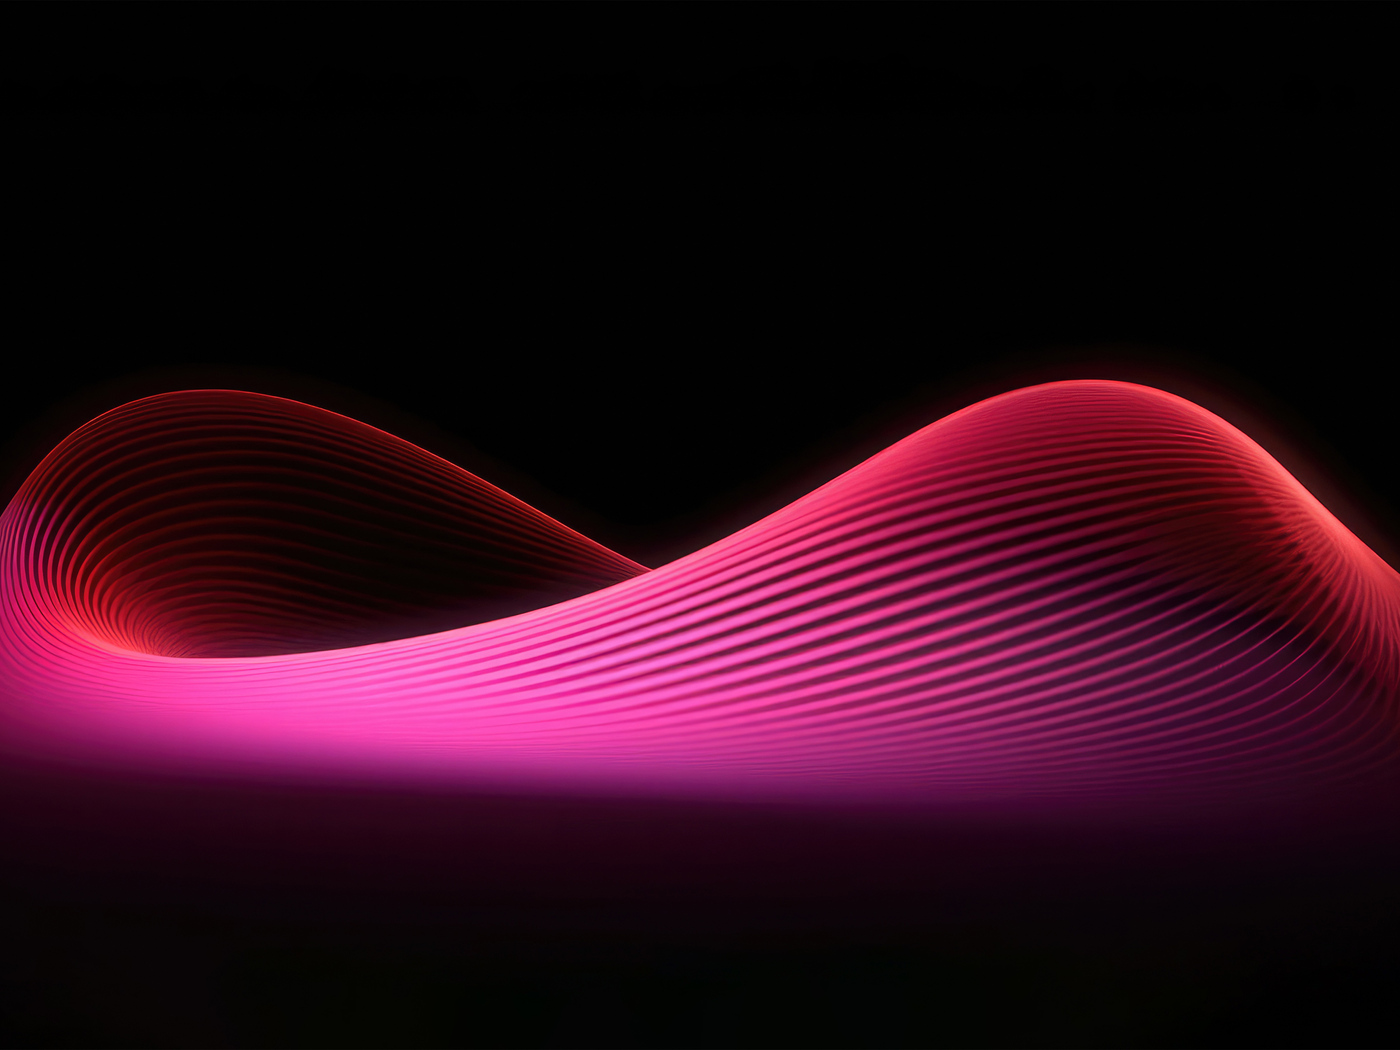 wave-glow-abstract-pink-5k-p5.jpg